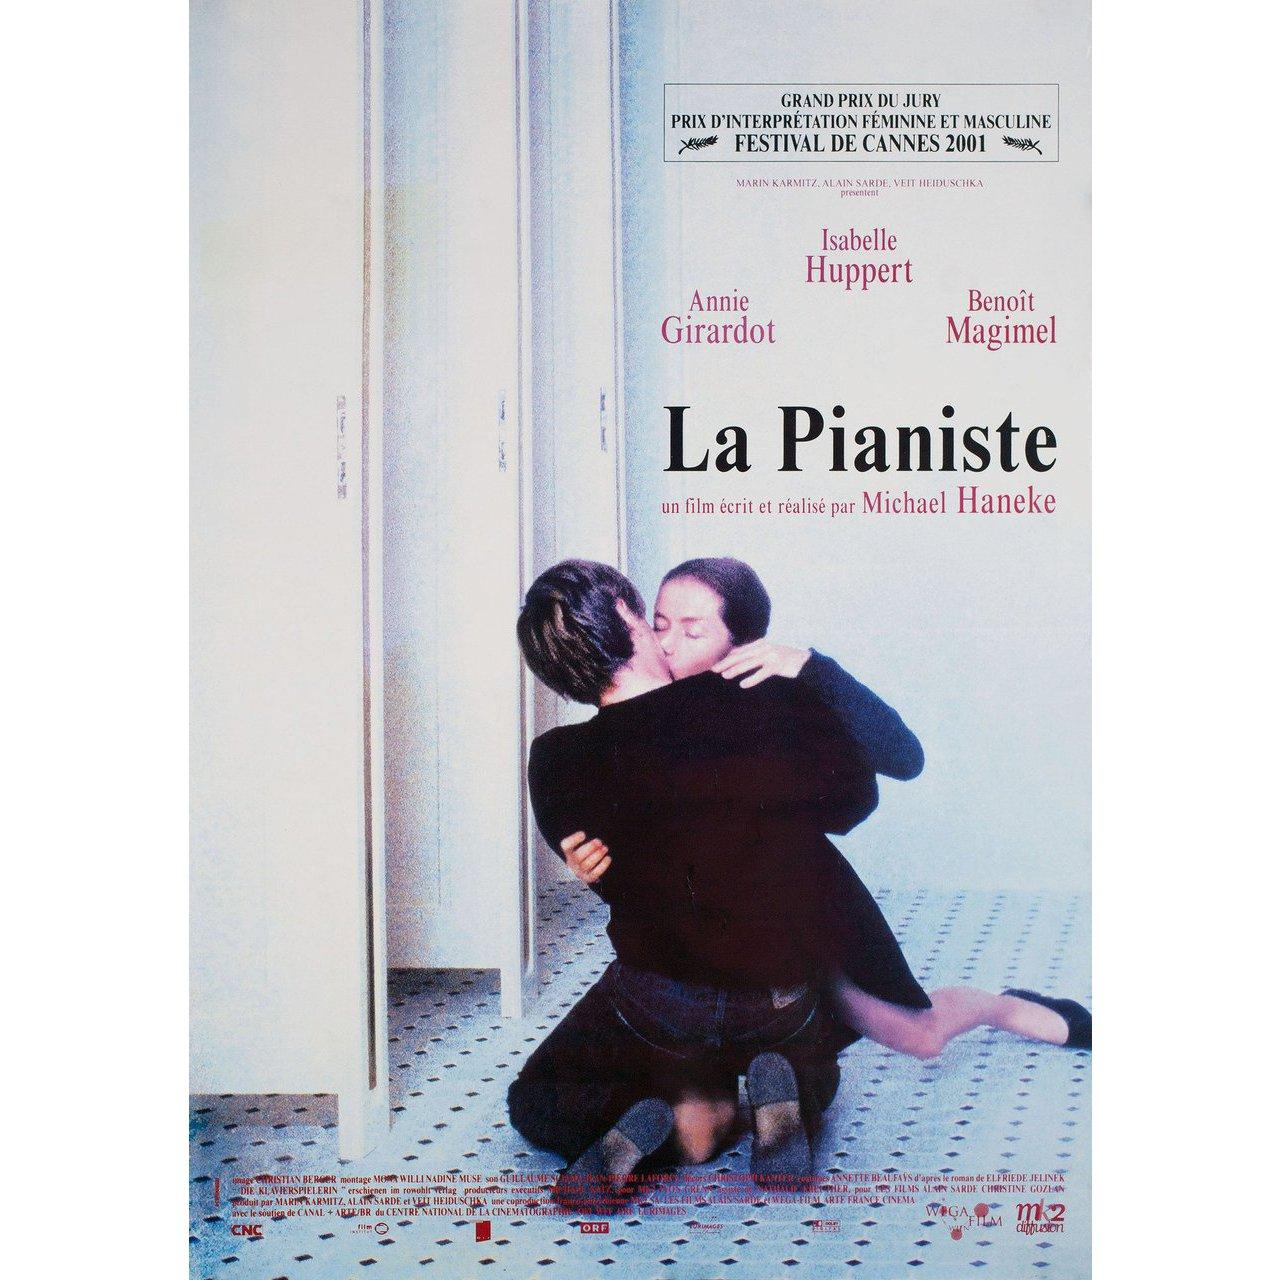 Original 2001 Dutch A1 poster for the film “The Piano Teacher” (La Pianiste) directed by Michael Haneke with Isabelle Huppert / Annie Girardot / Benoit Magimel / Susanne Lothar. Fine condition, rolled. Please note: the size is stated in inches and